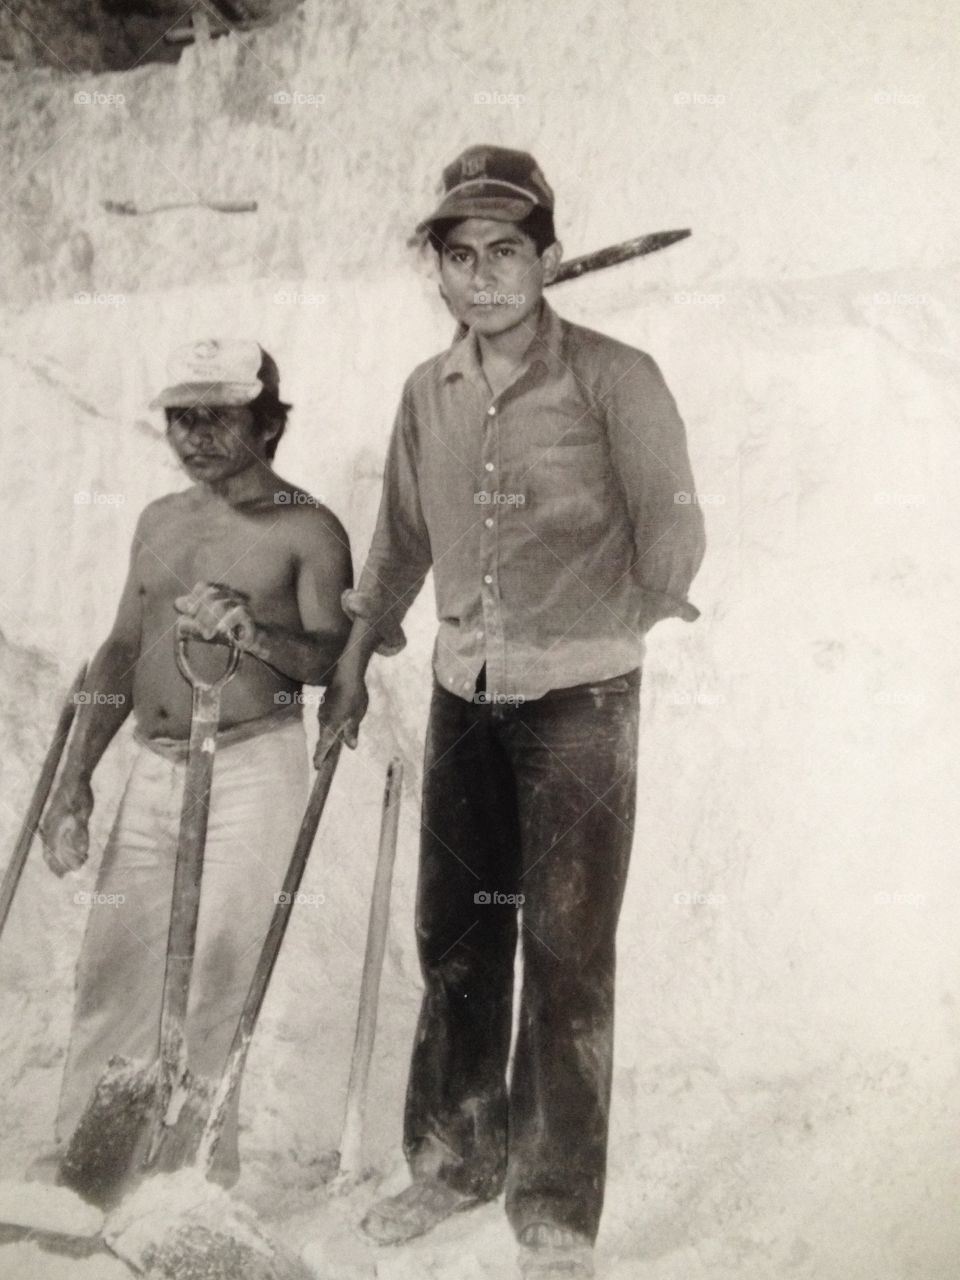 Miners in Mexico 